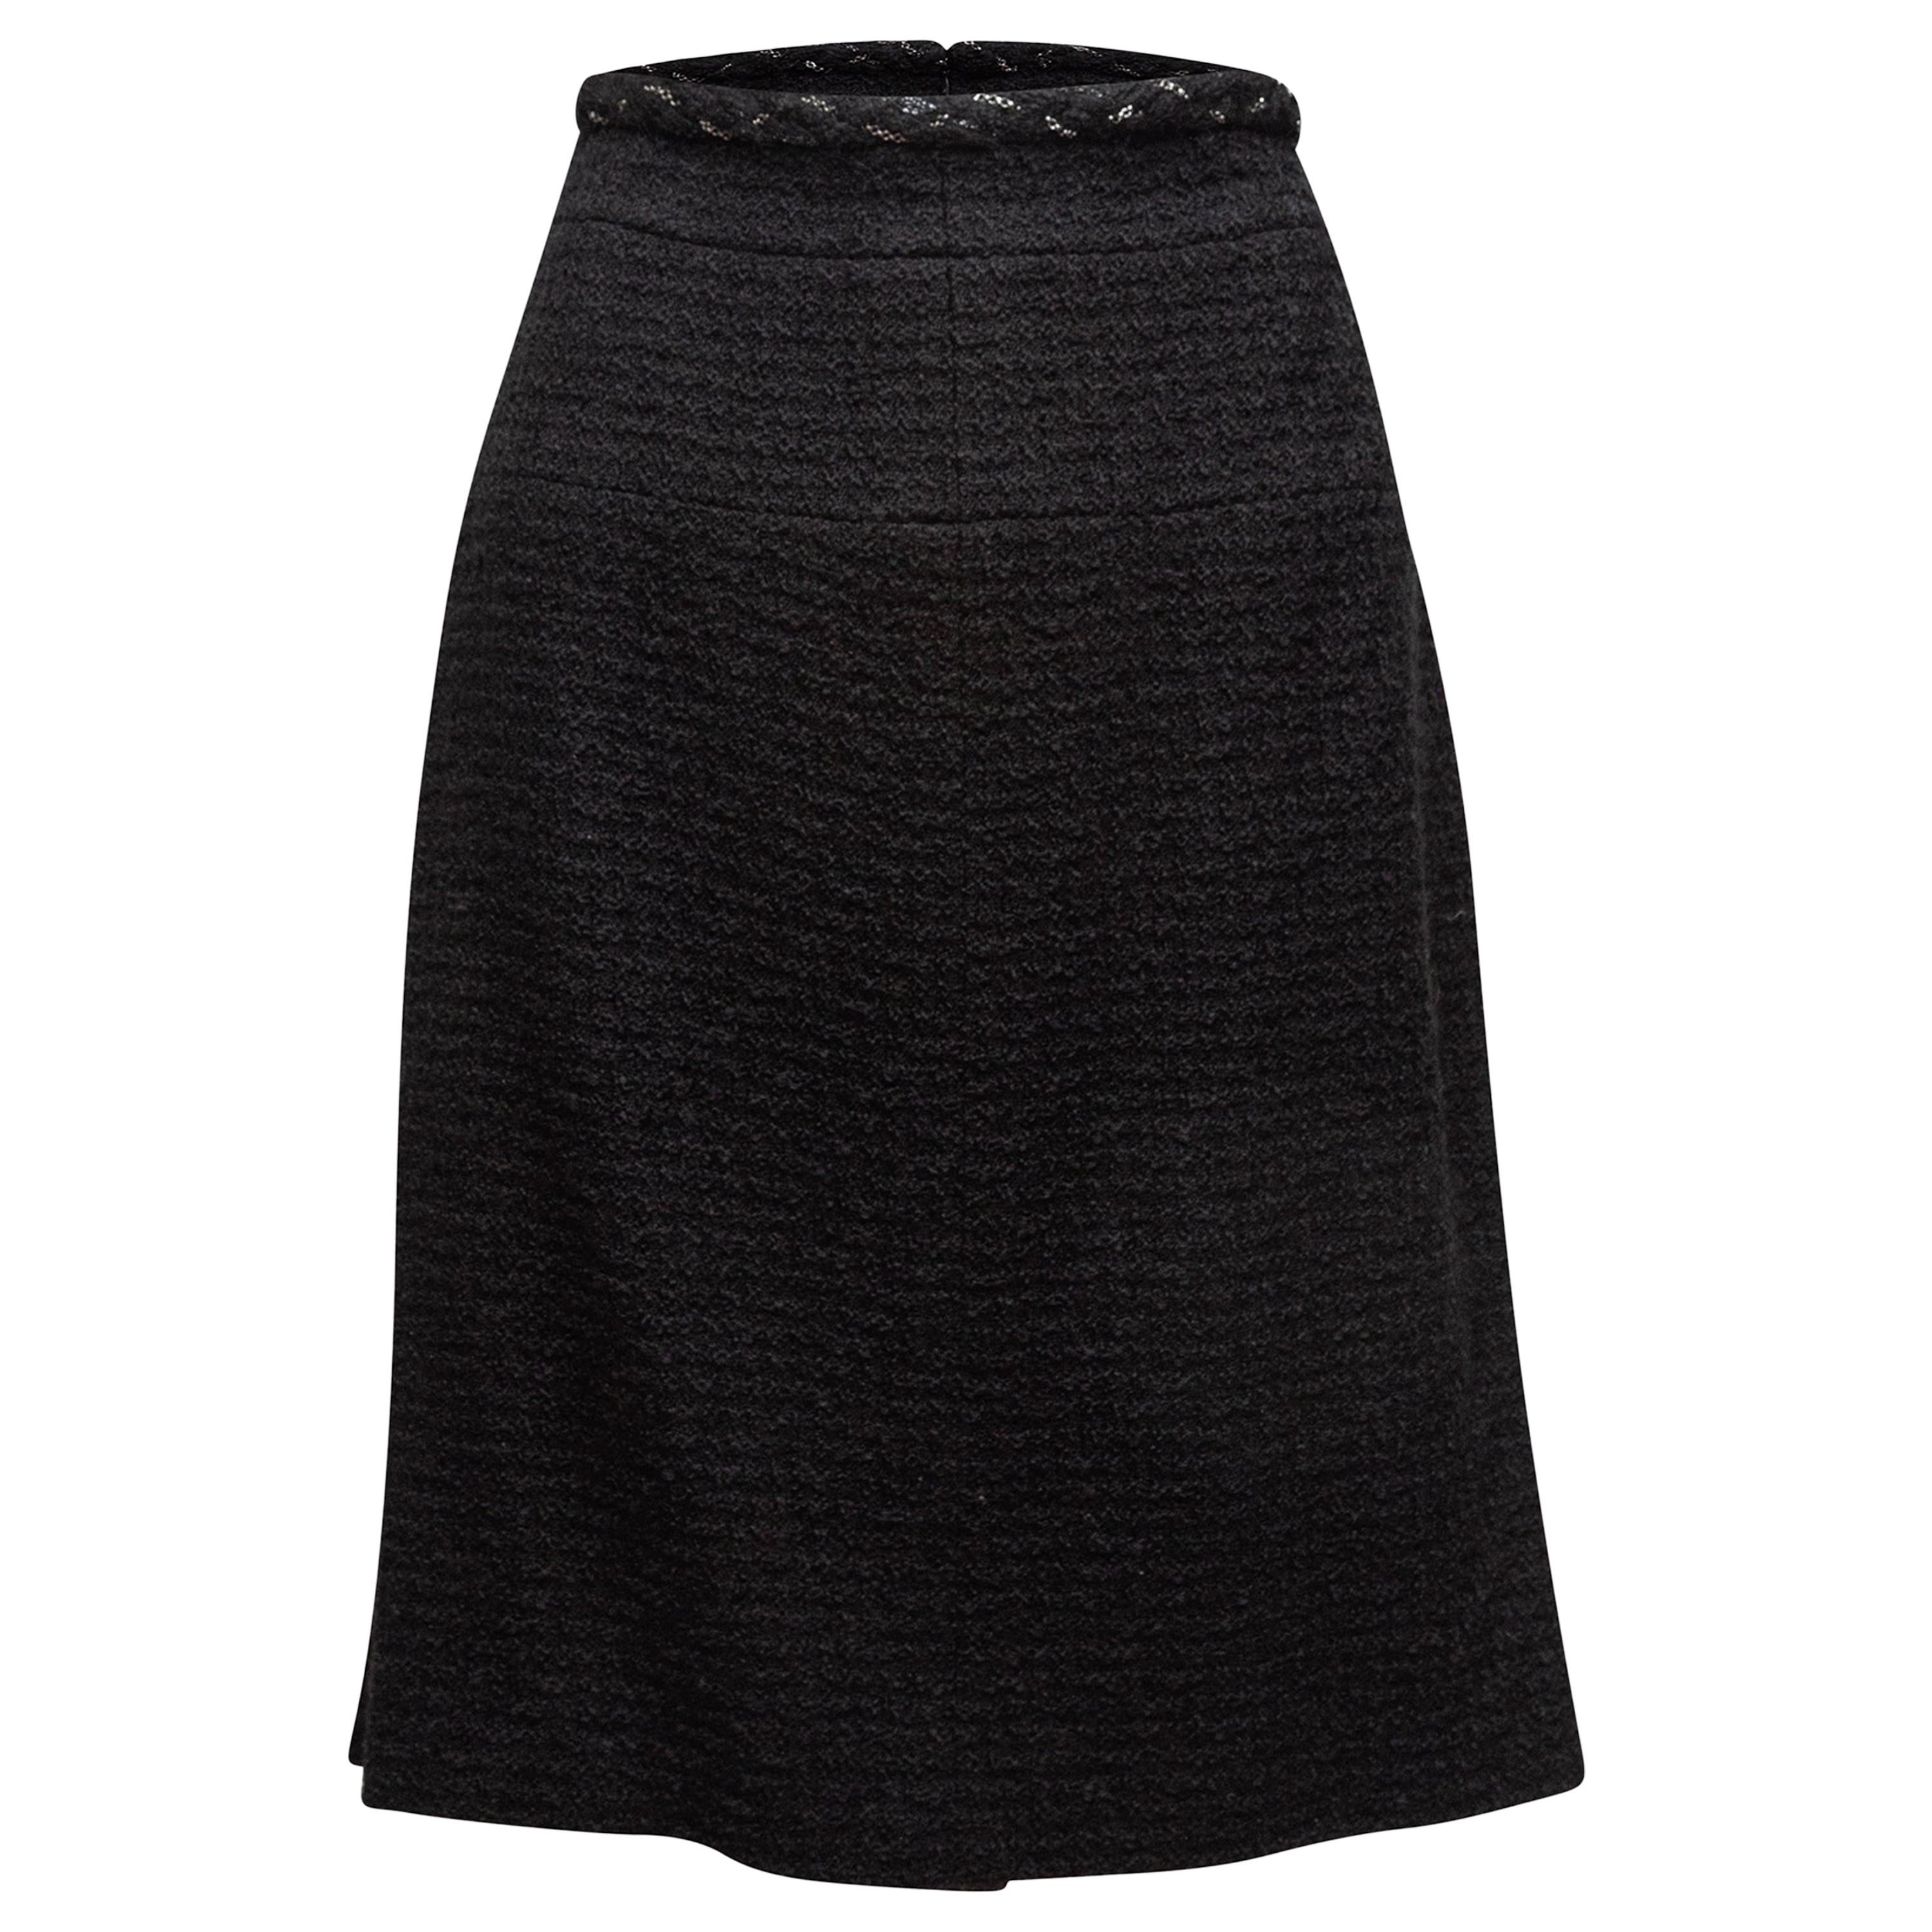 Chanel Black Chain-Accented Knee-Length Skirt